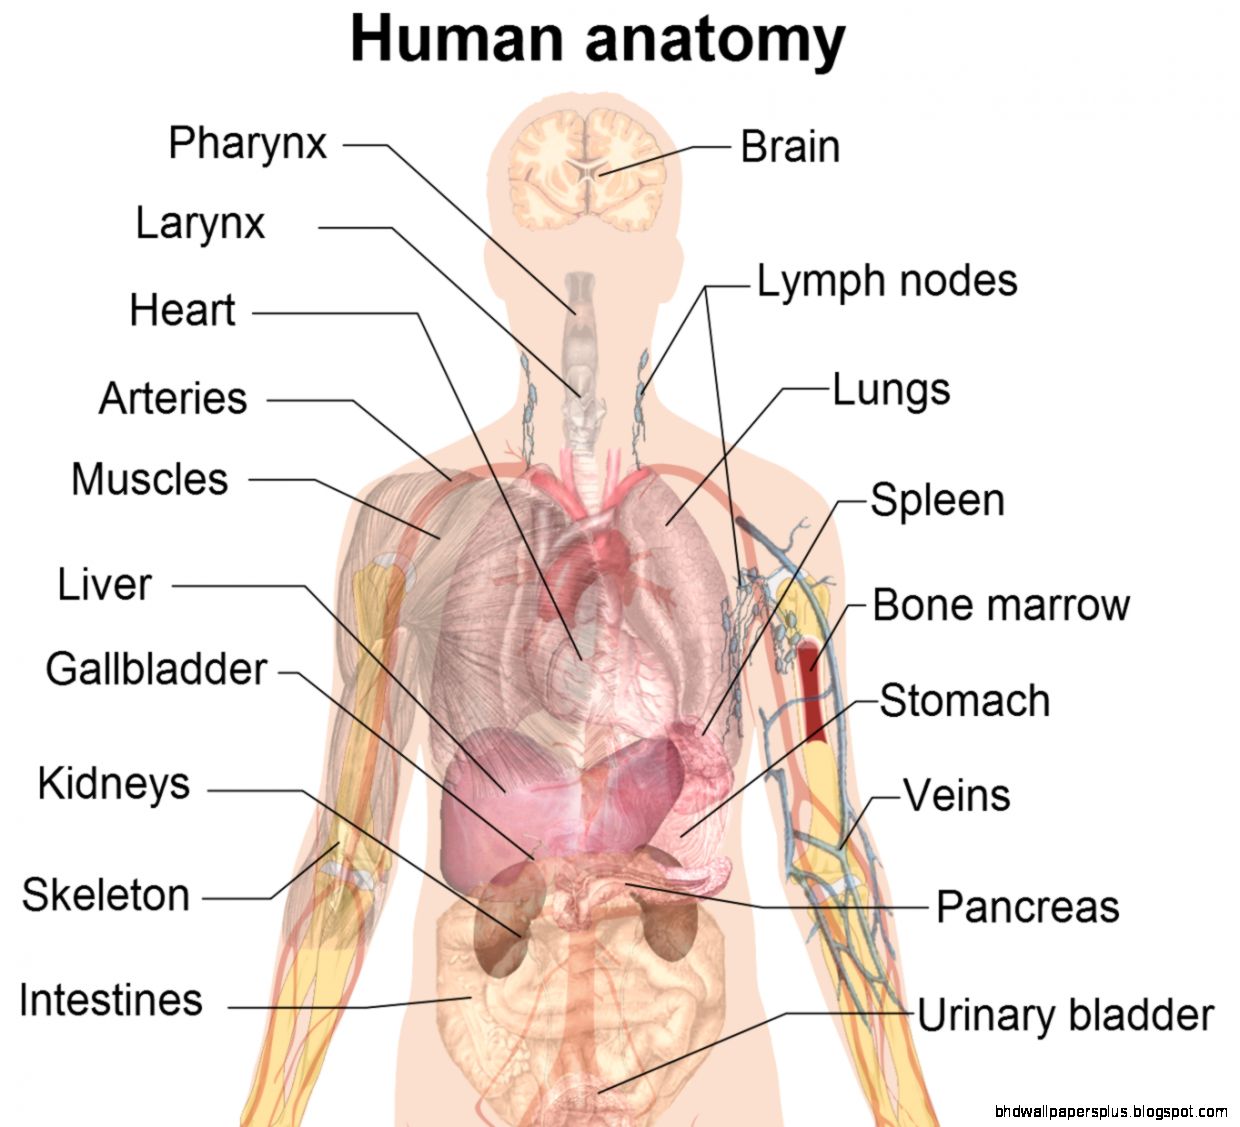 Human Anatomy Pictures